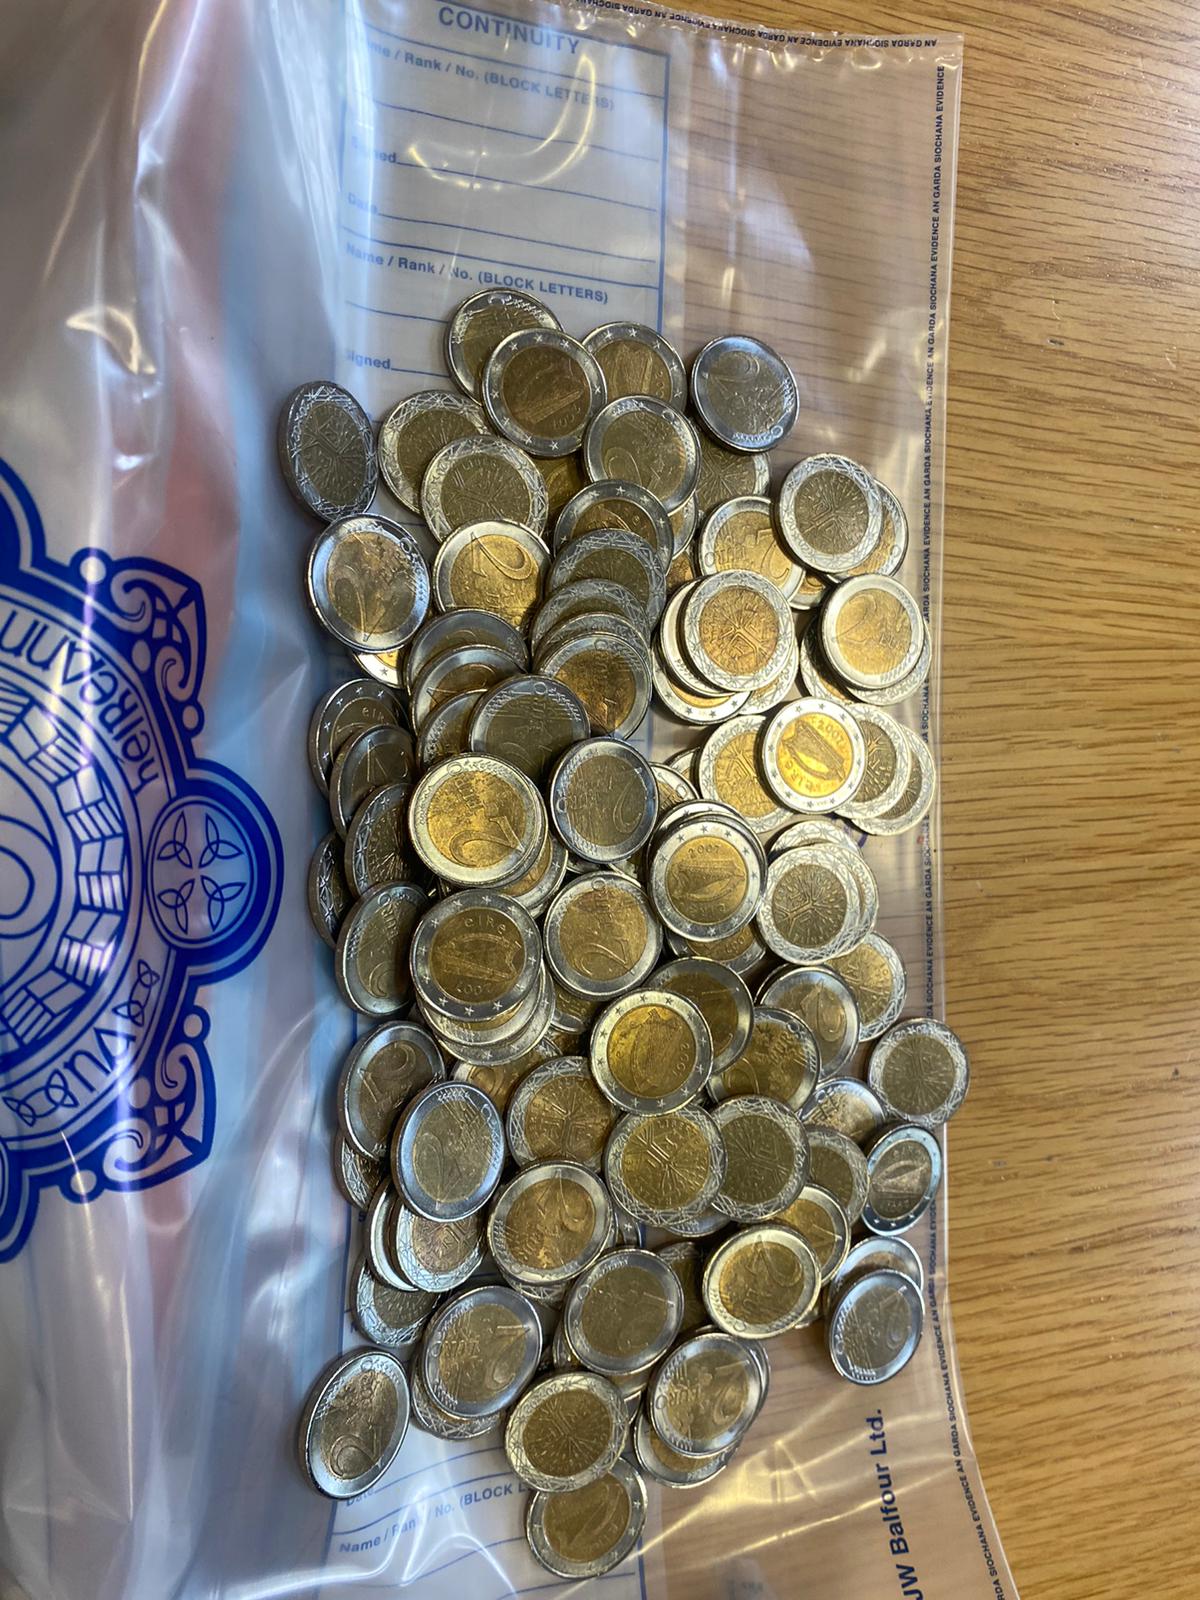 Counterfeit coins seized in Raheny. Image: Mairéad Cleary/Newstalk